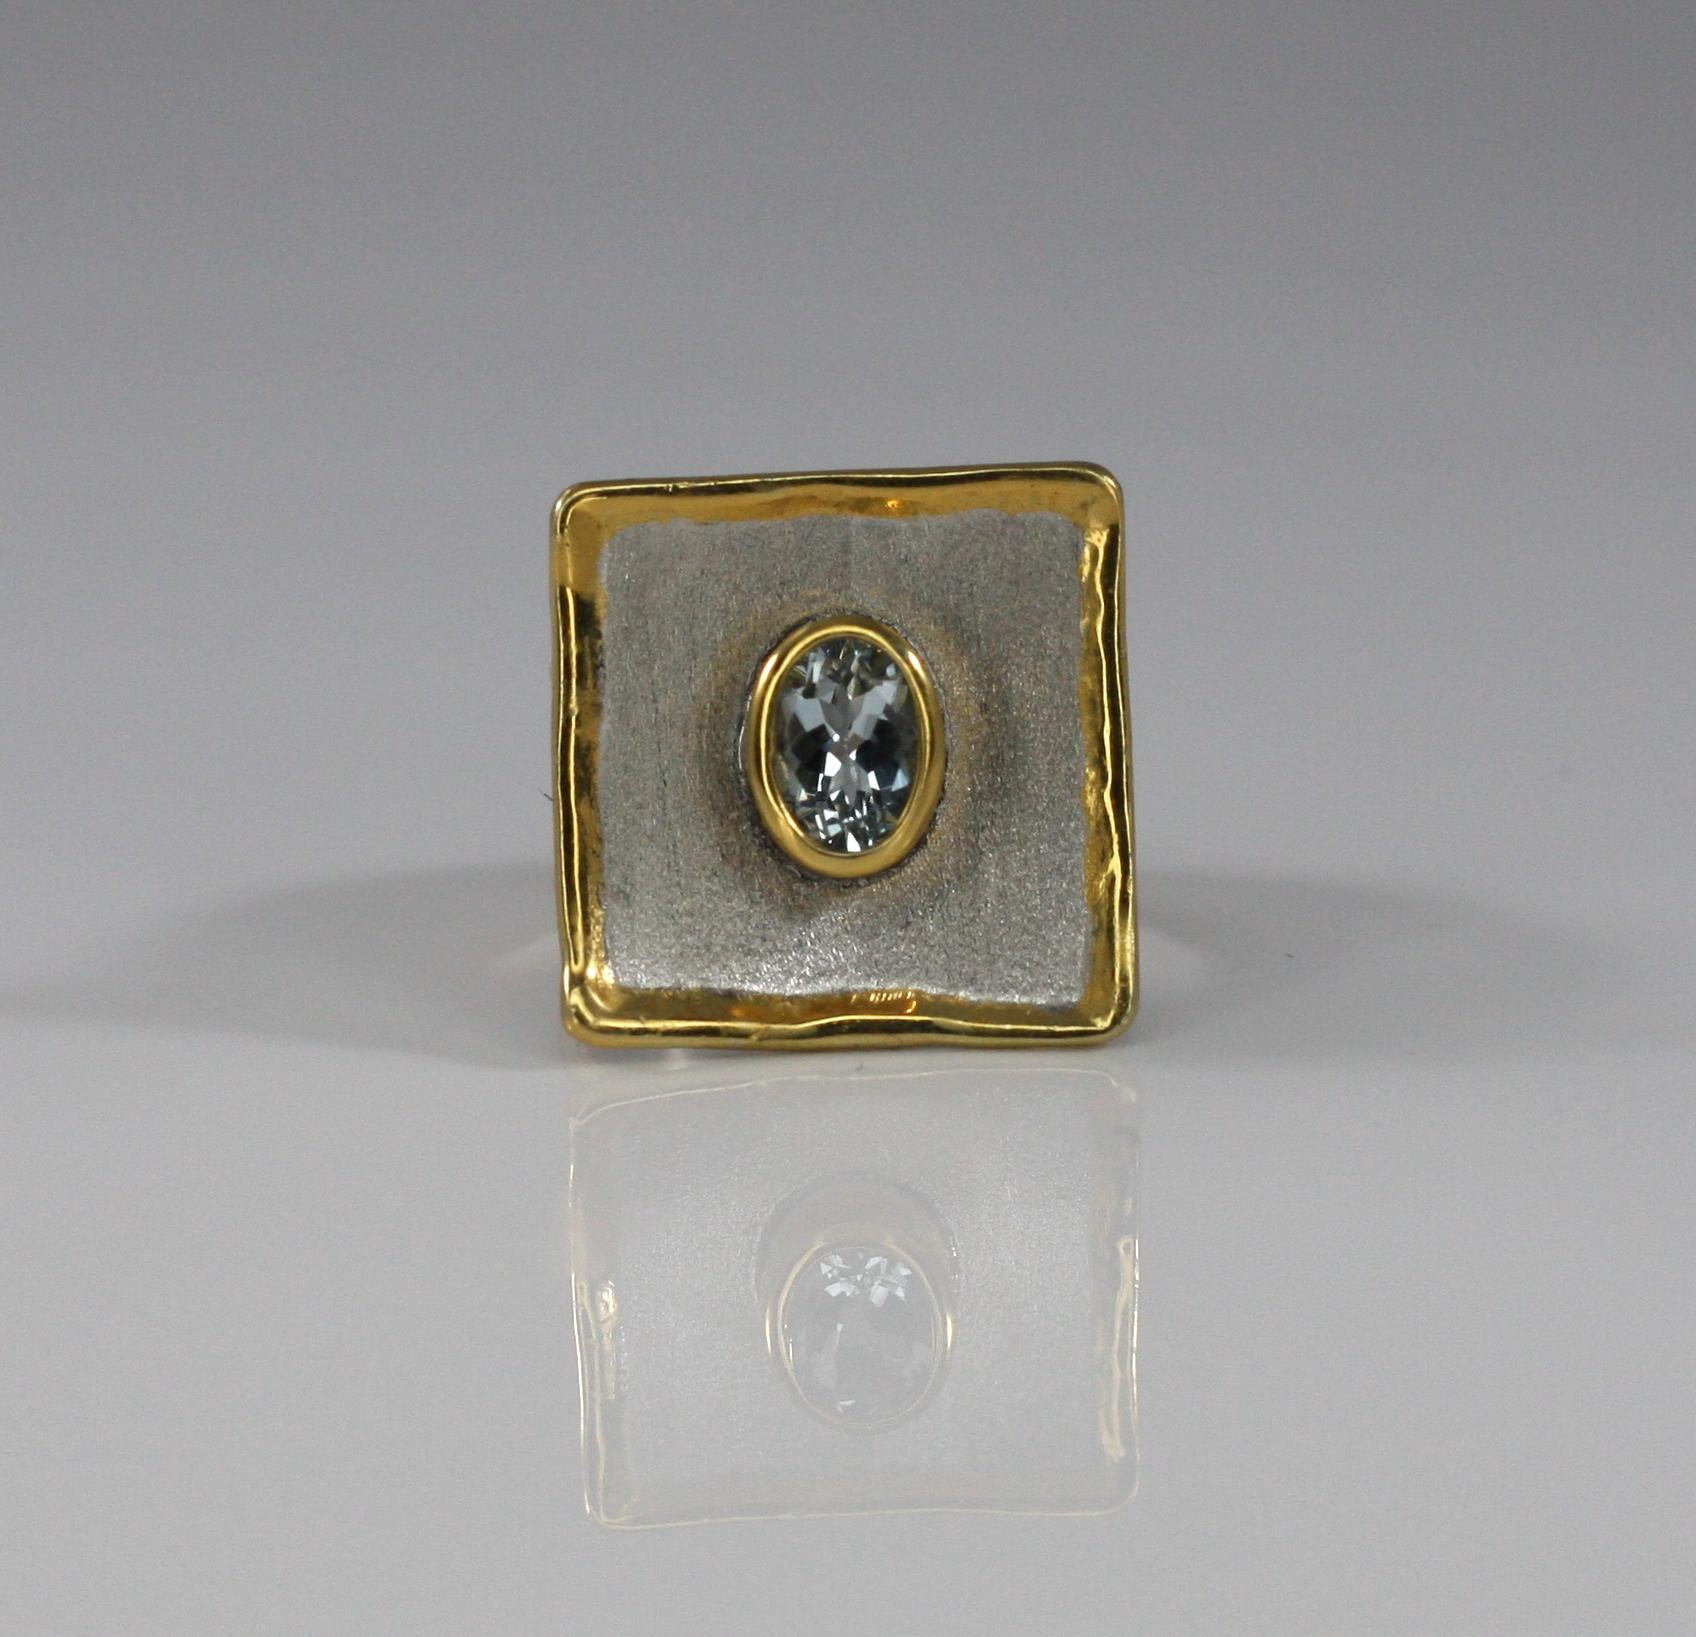 Presenting Yianni Creations handmade artisan ring is made from fine silver 950 purity plated with palladium to resist the elements. This gorgeous square ring from Midas Collection has edges decorated with 24 Karat gold thick overlay of 3+ micros and